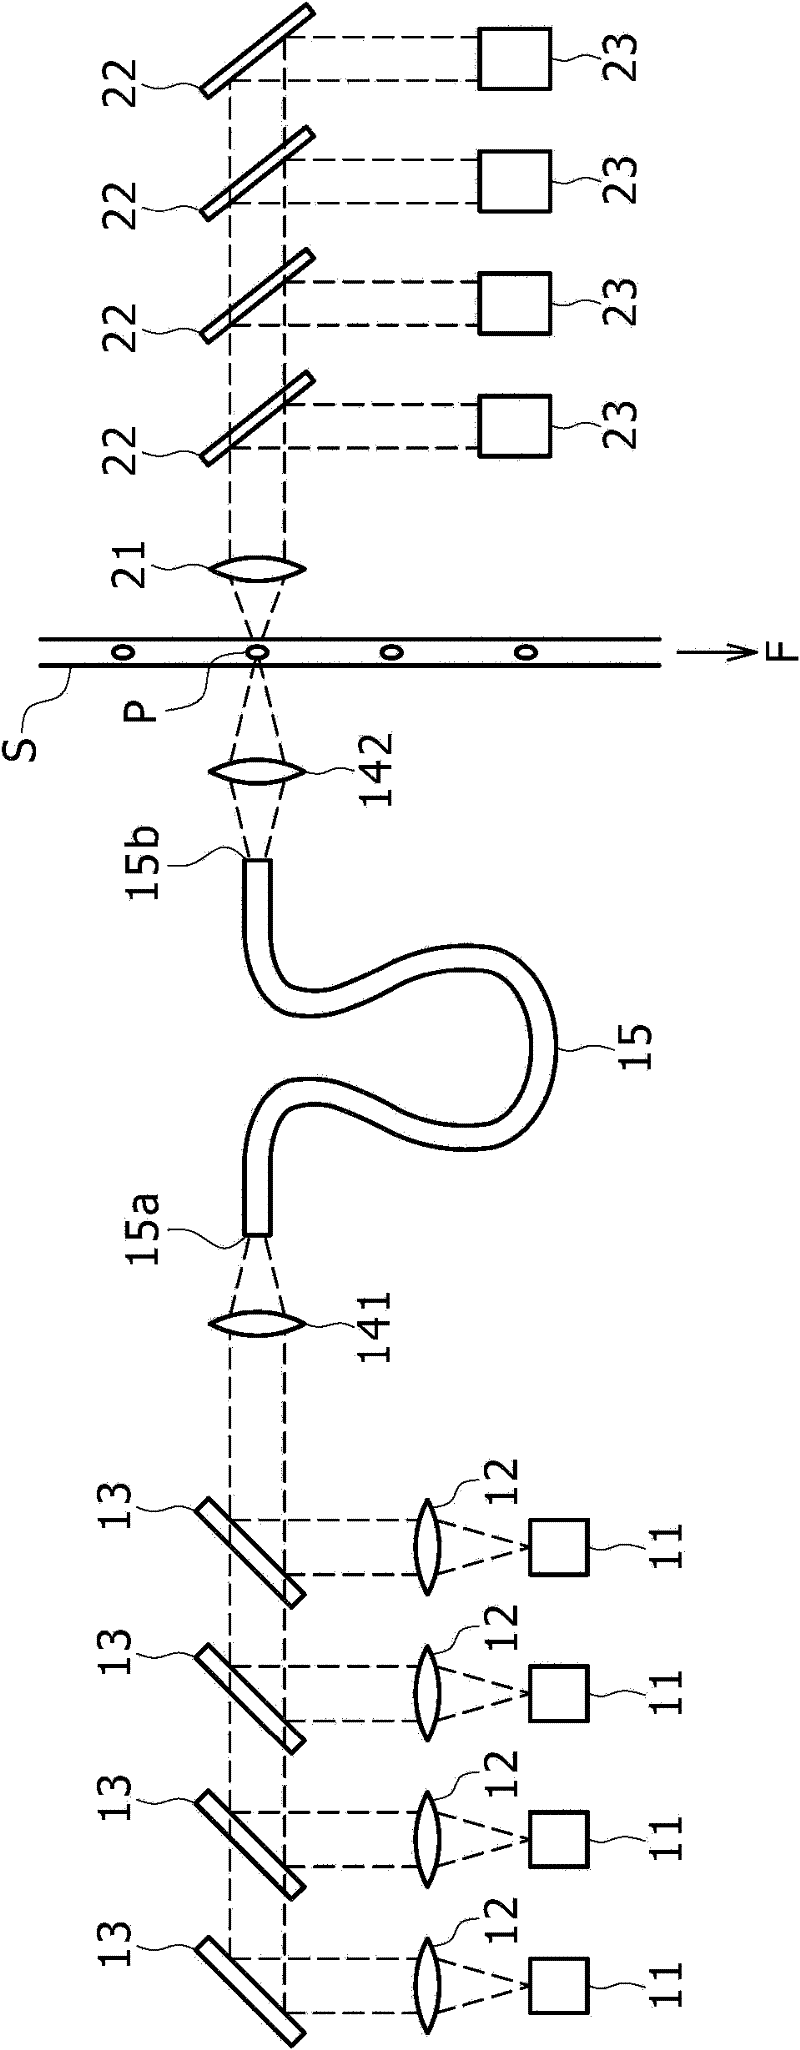 Minute particle analyzing device and method